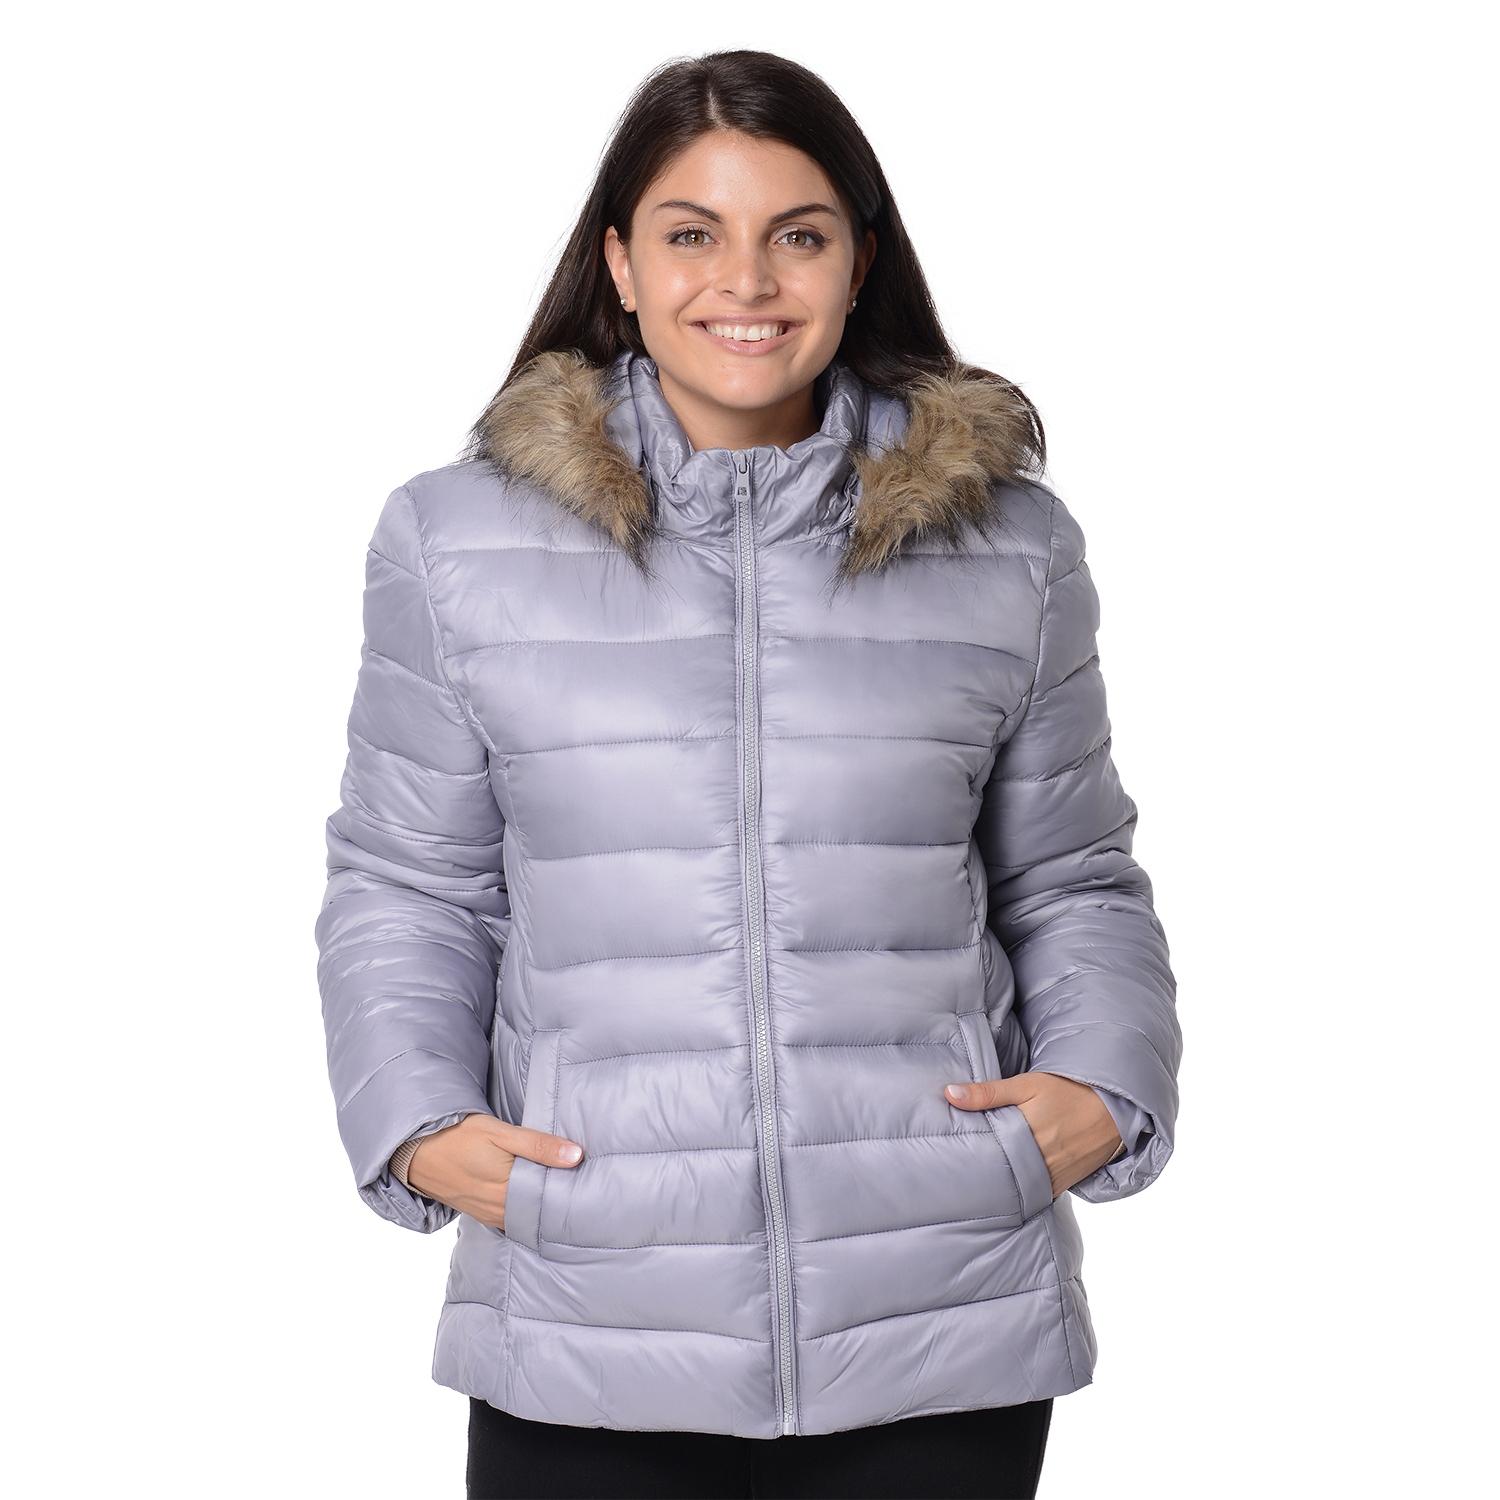 Women Puffer Jacket with Faux Fur Trim Hood and Two Pockets (Size XXL) - Silver Grey